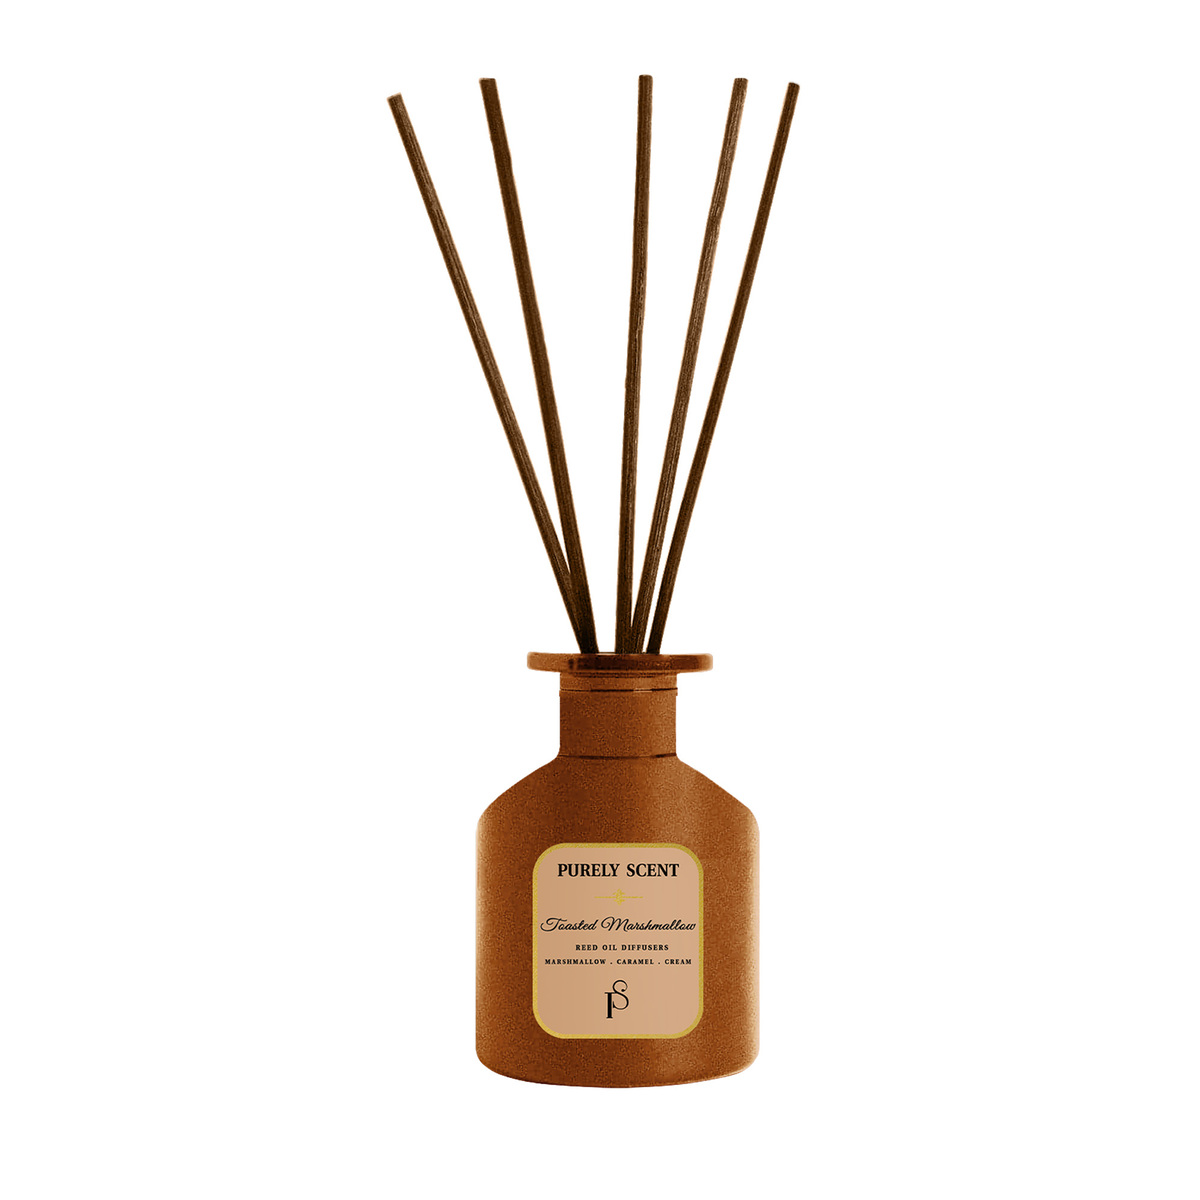 Purely Scent Toasted Marshmallow 20% Essencial Oil Diffuser 200ml